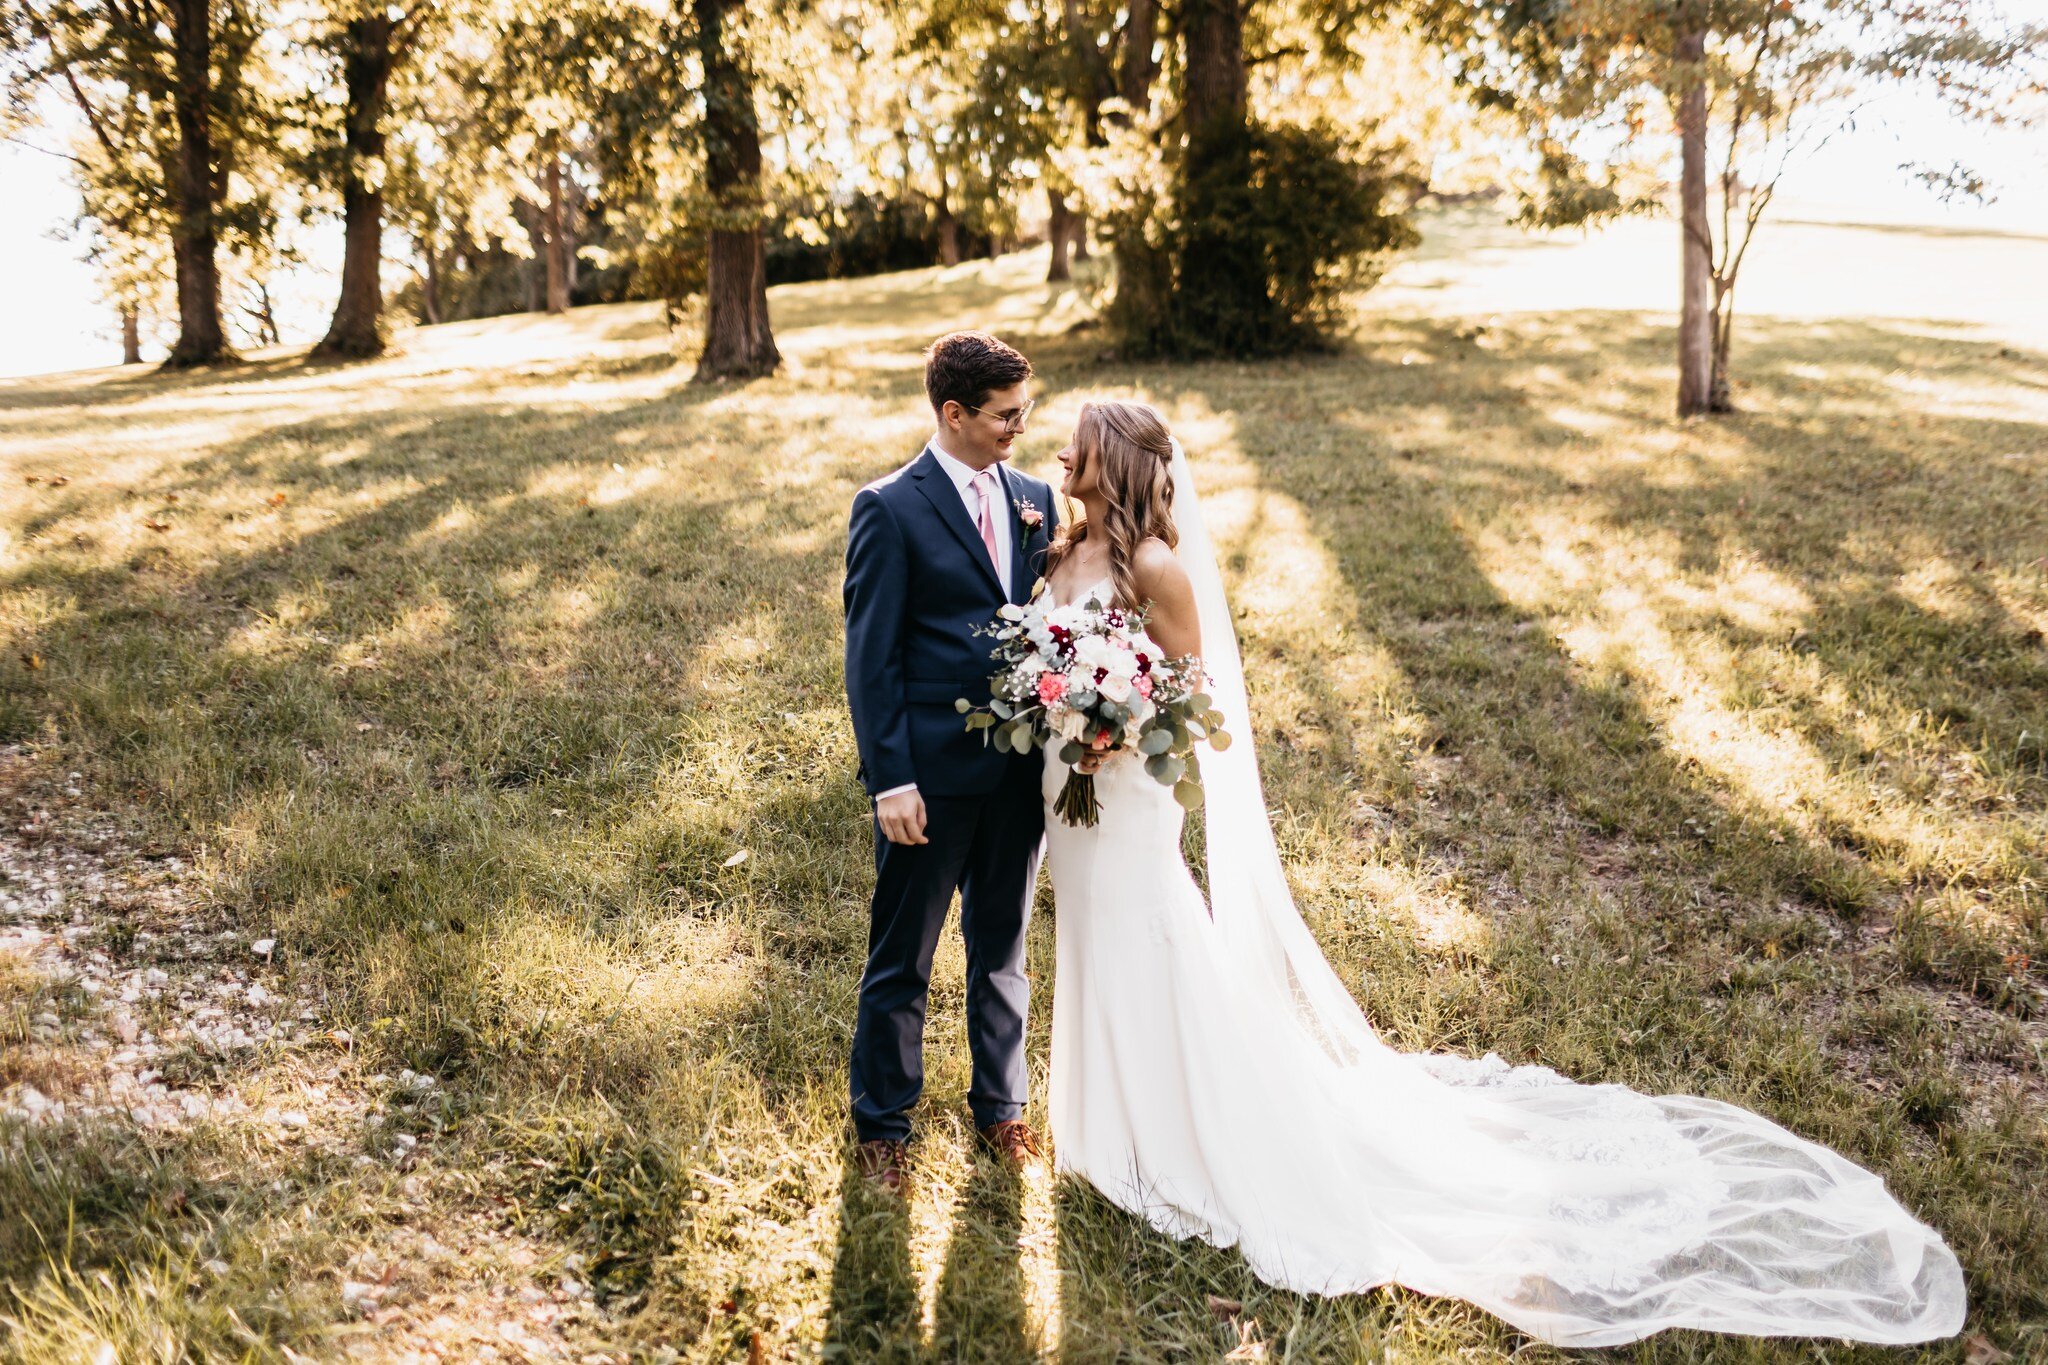 Haue Valley is both a charming &amp; affordable St. Louis area wedding venue with over 250+ acres of on-site Pinterest-worthy photo spots.📸🥰

Check out more of our unique picture spots + transparent pricing on our website:
www.HaueValleyWeddings.co